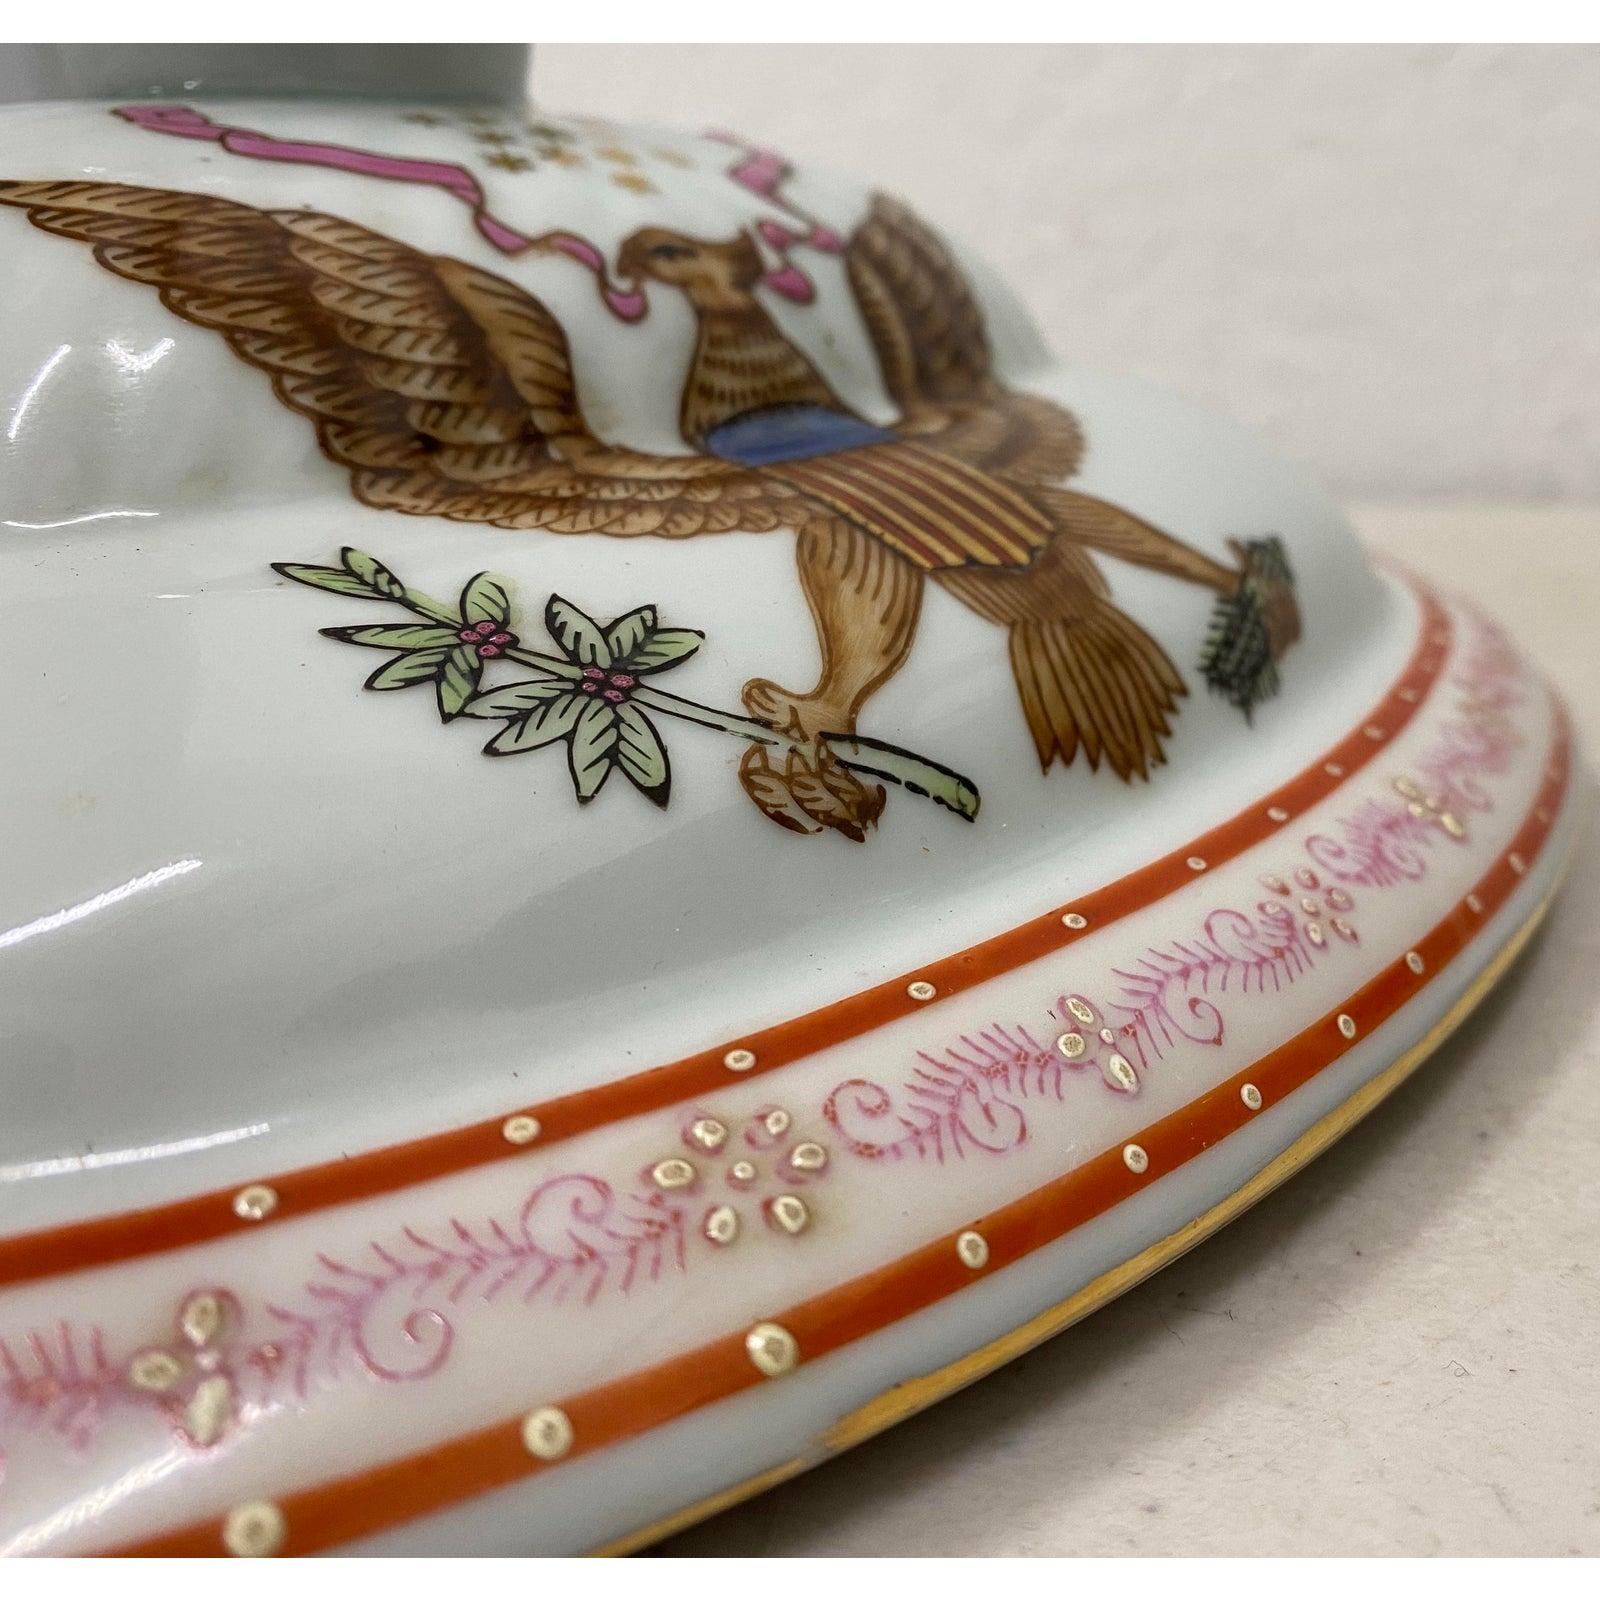 Early 20th century Chinese Export American Amorial tureen

A fine old Chinese Export tureen with an American Eagle and Thirteen Stars

The tureen has its original lid and spill platter.

Dimensions 15